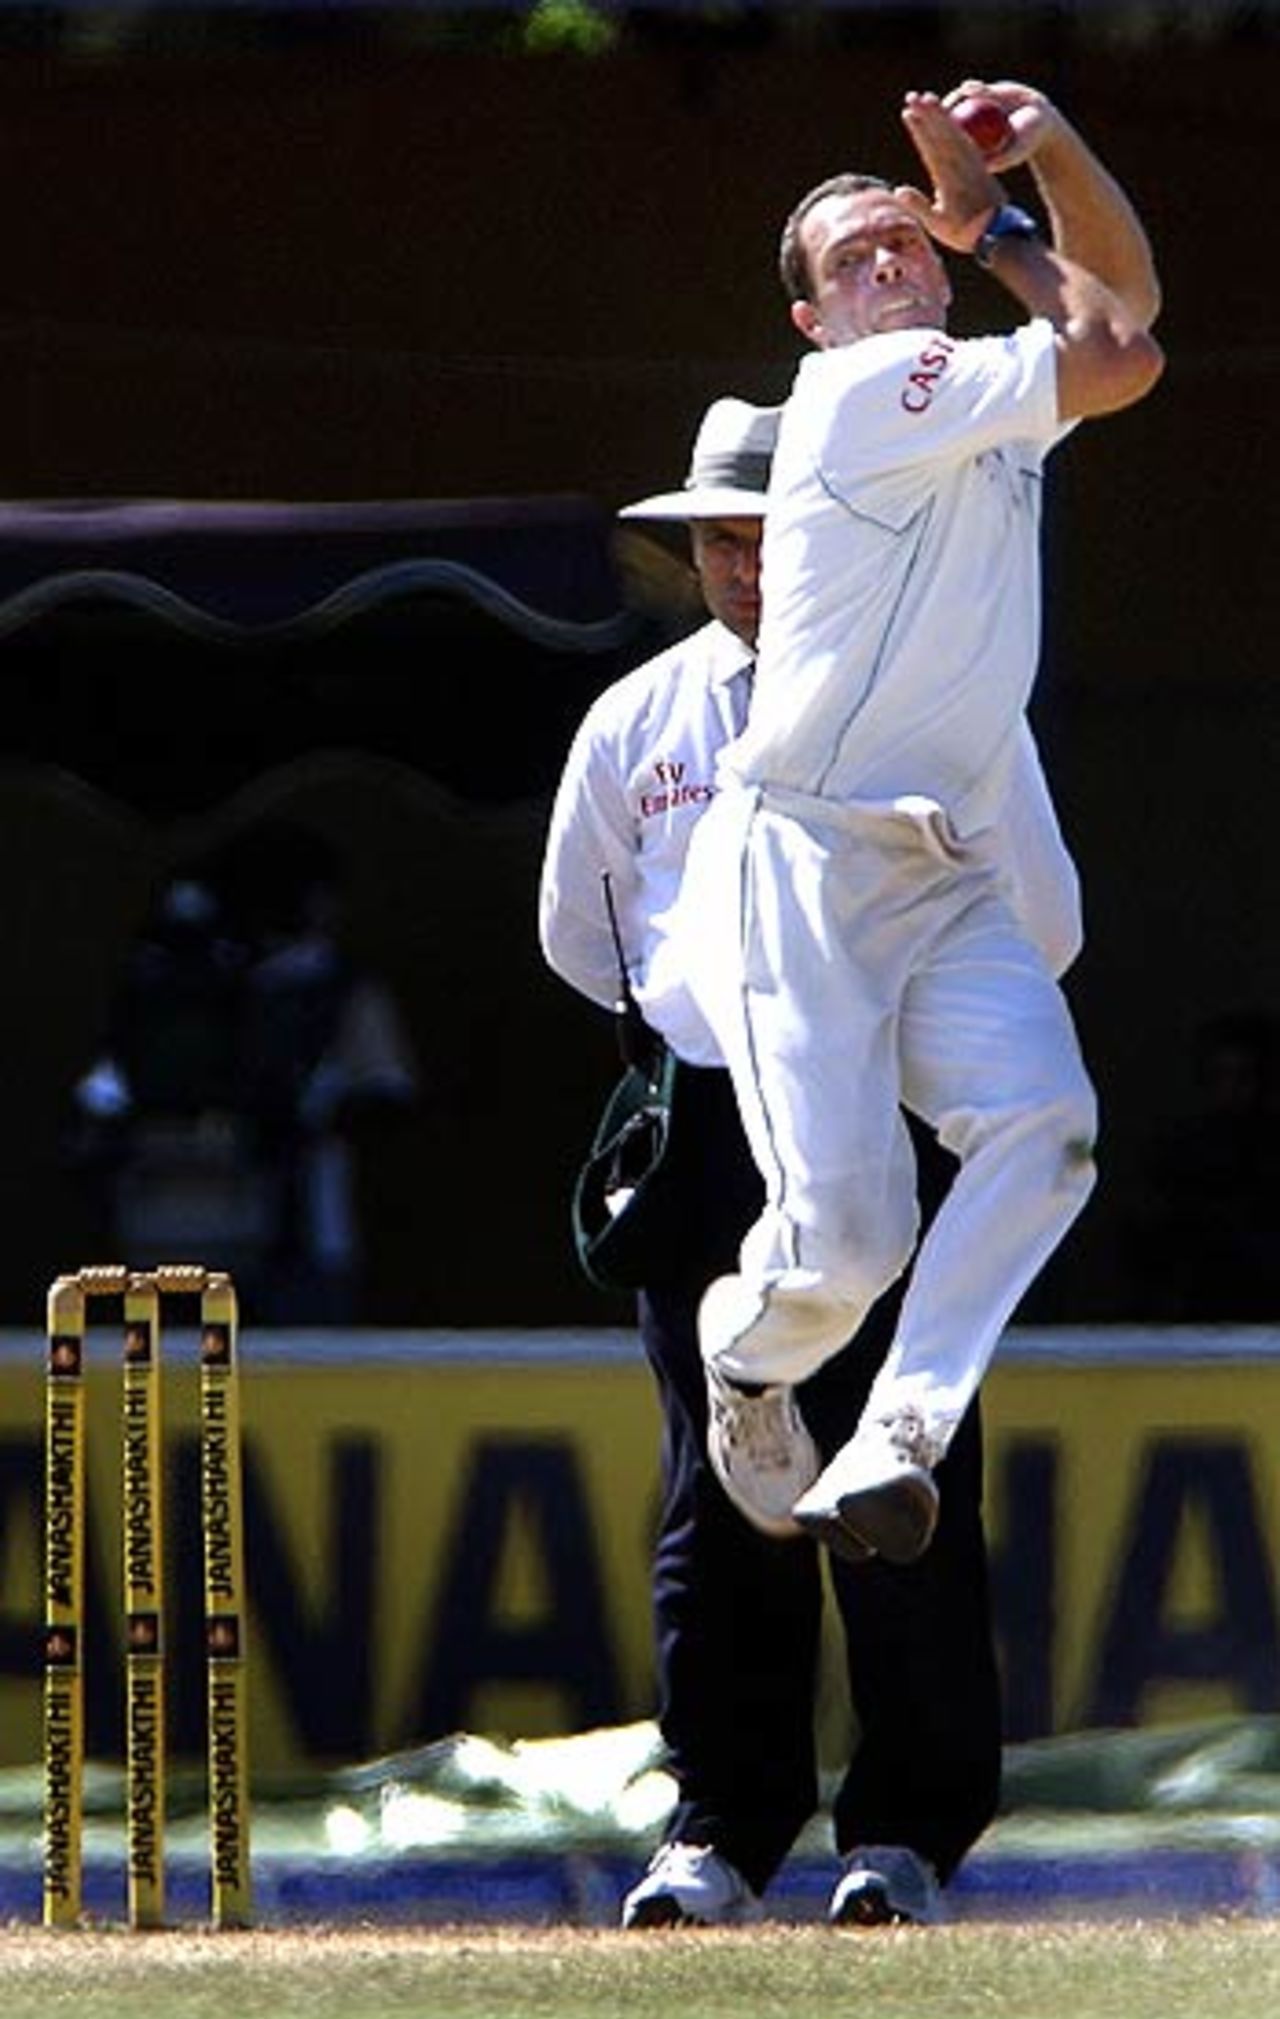 Nicky Boje in action on the fourth day in Colombo, Sri Lanka v South Africa, 2nd Test, Colombo, 4th day, August 7, 2006